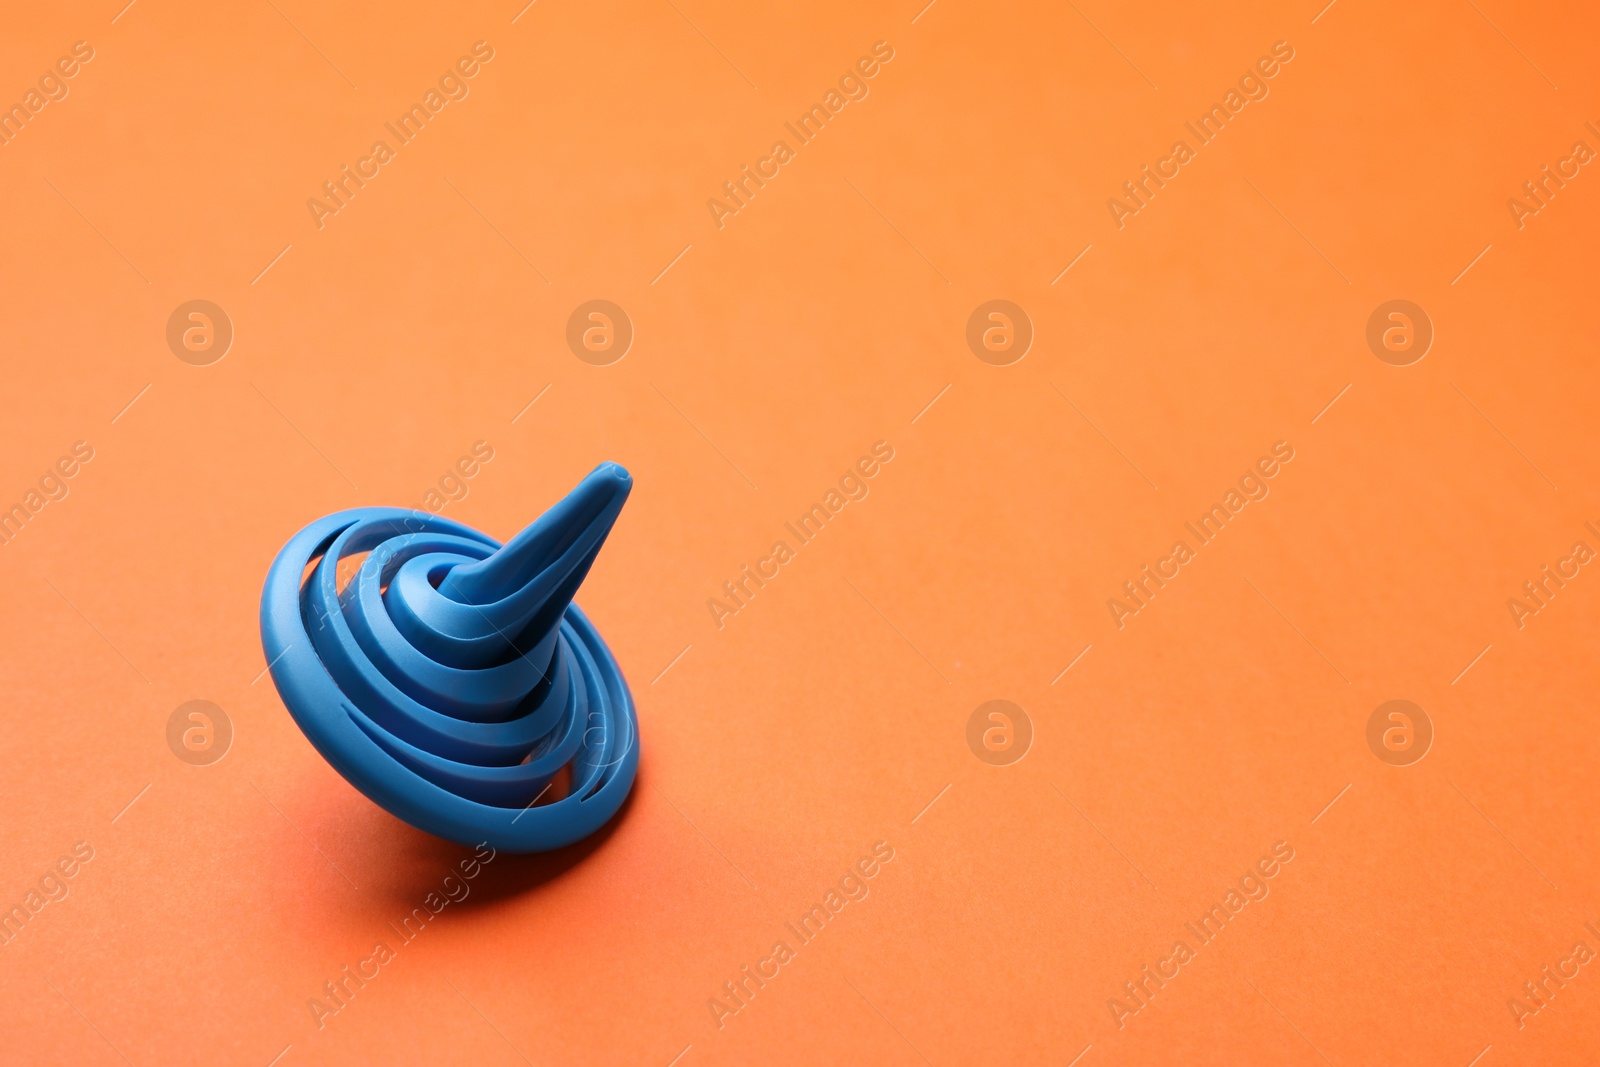 Photo of One blue spinning top on orange background